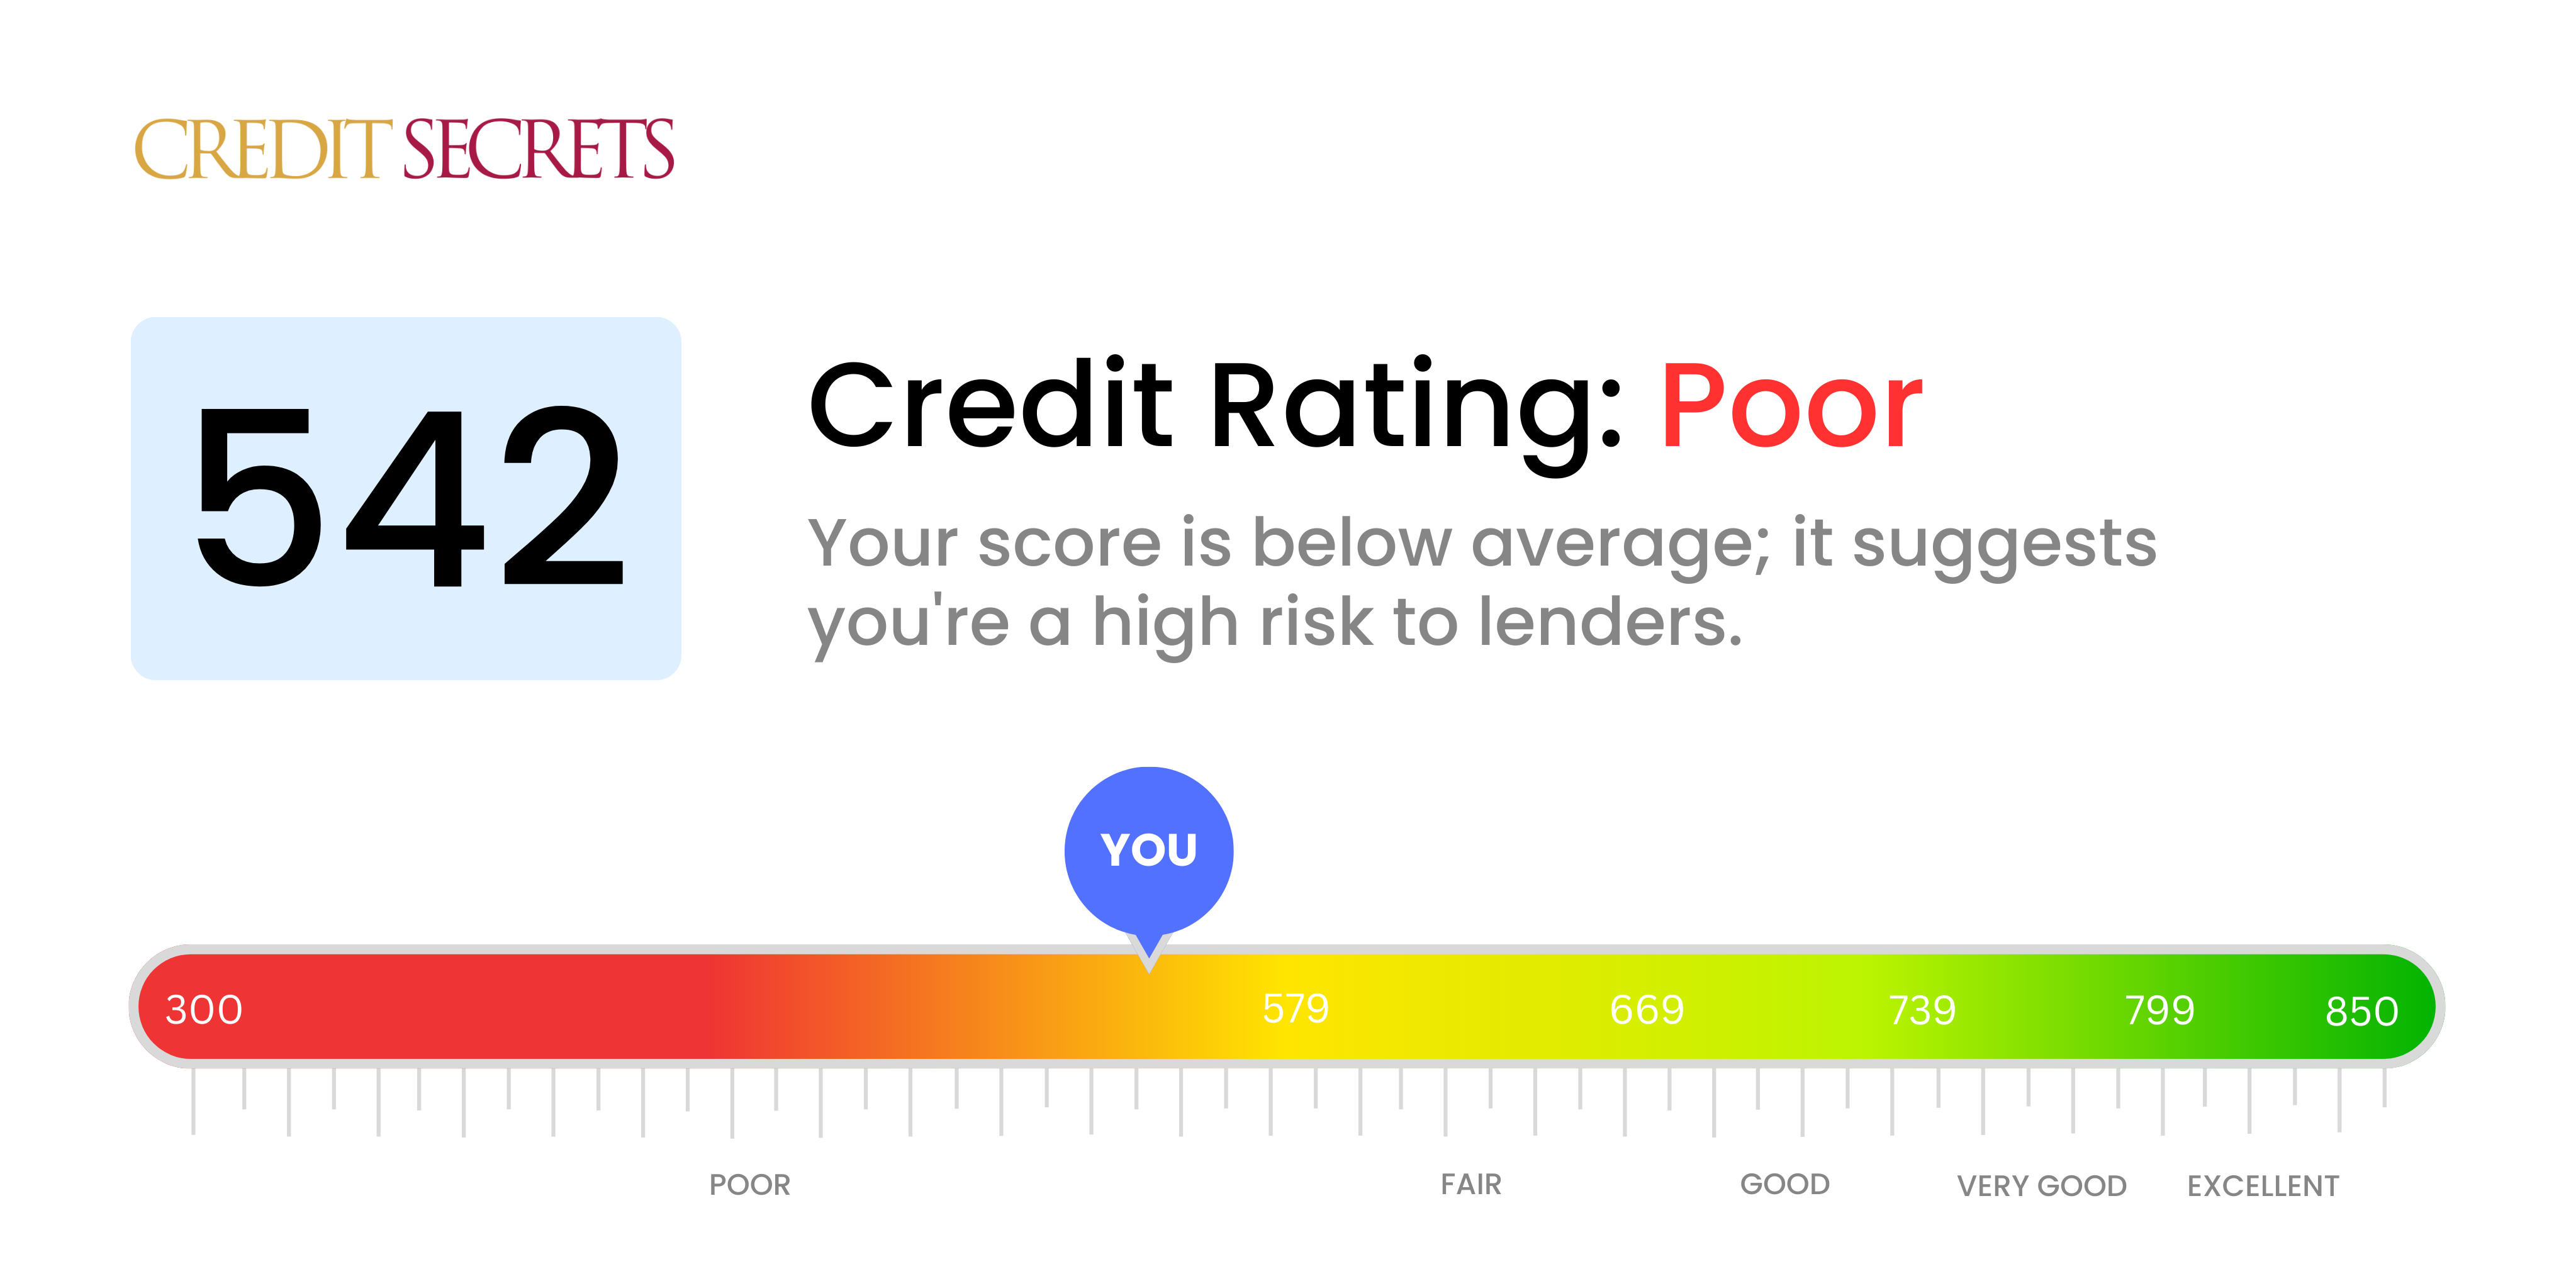 Is 542 a good credit score?